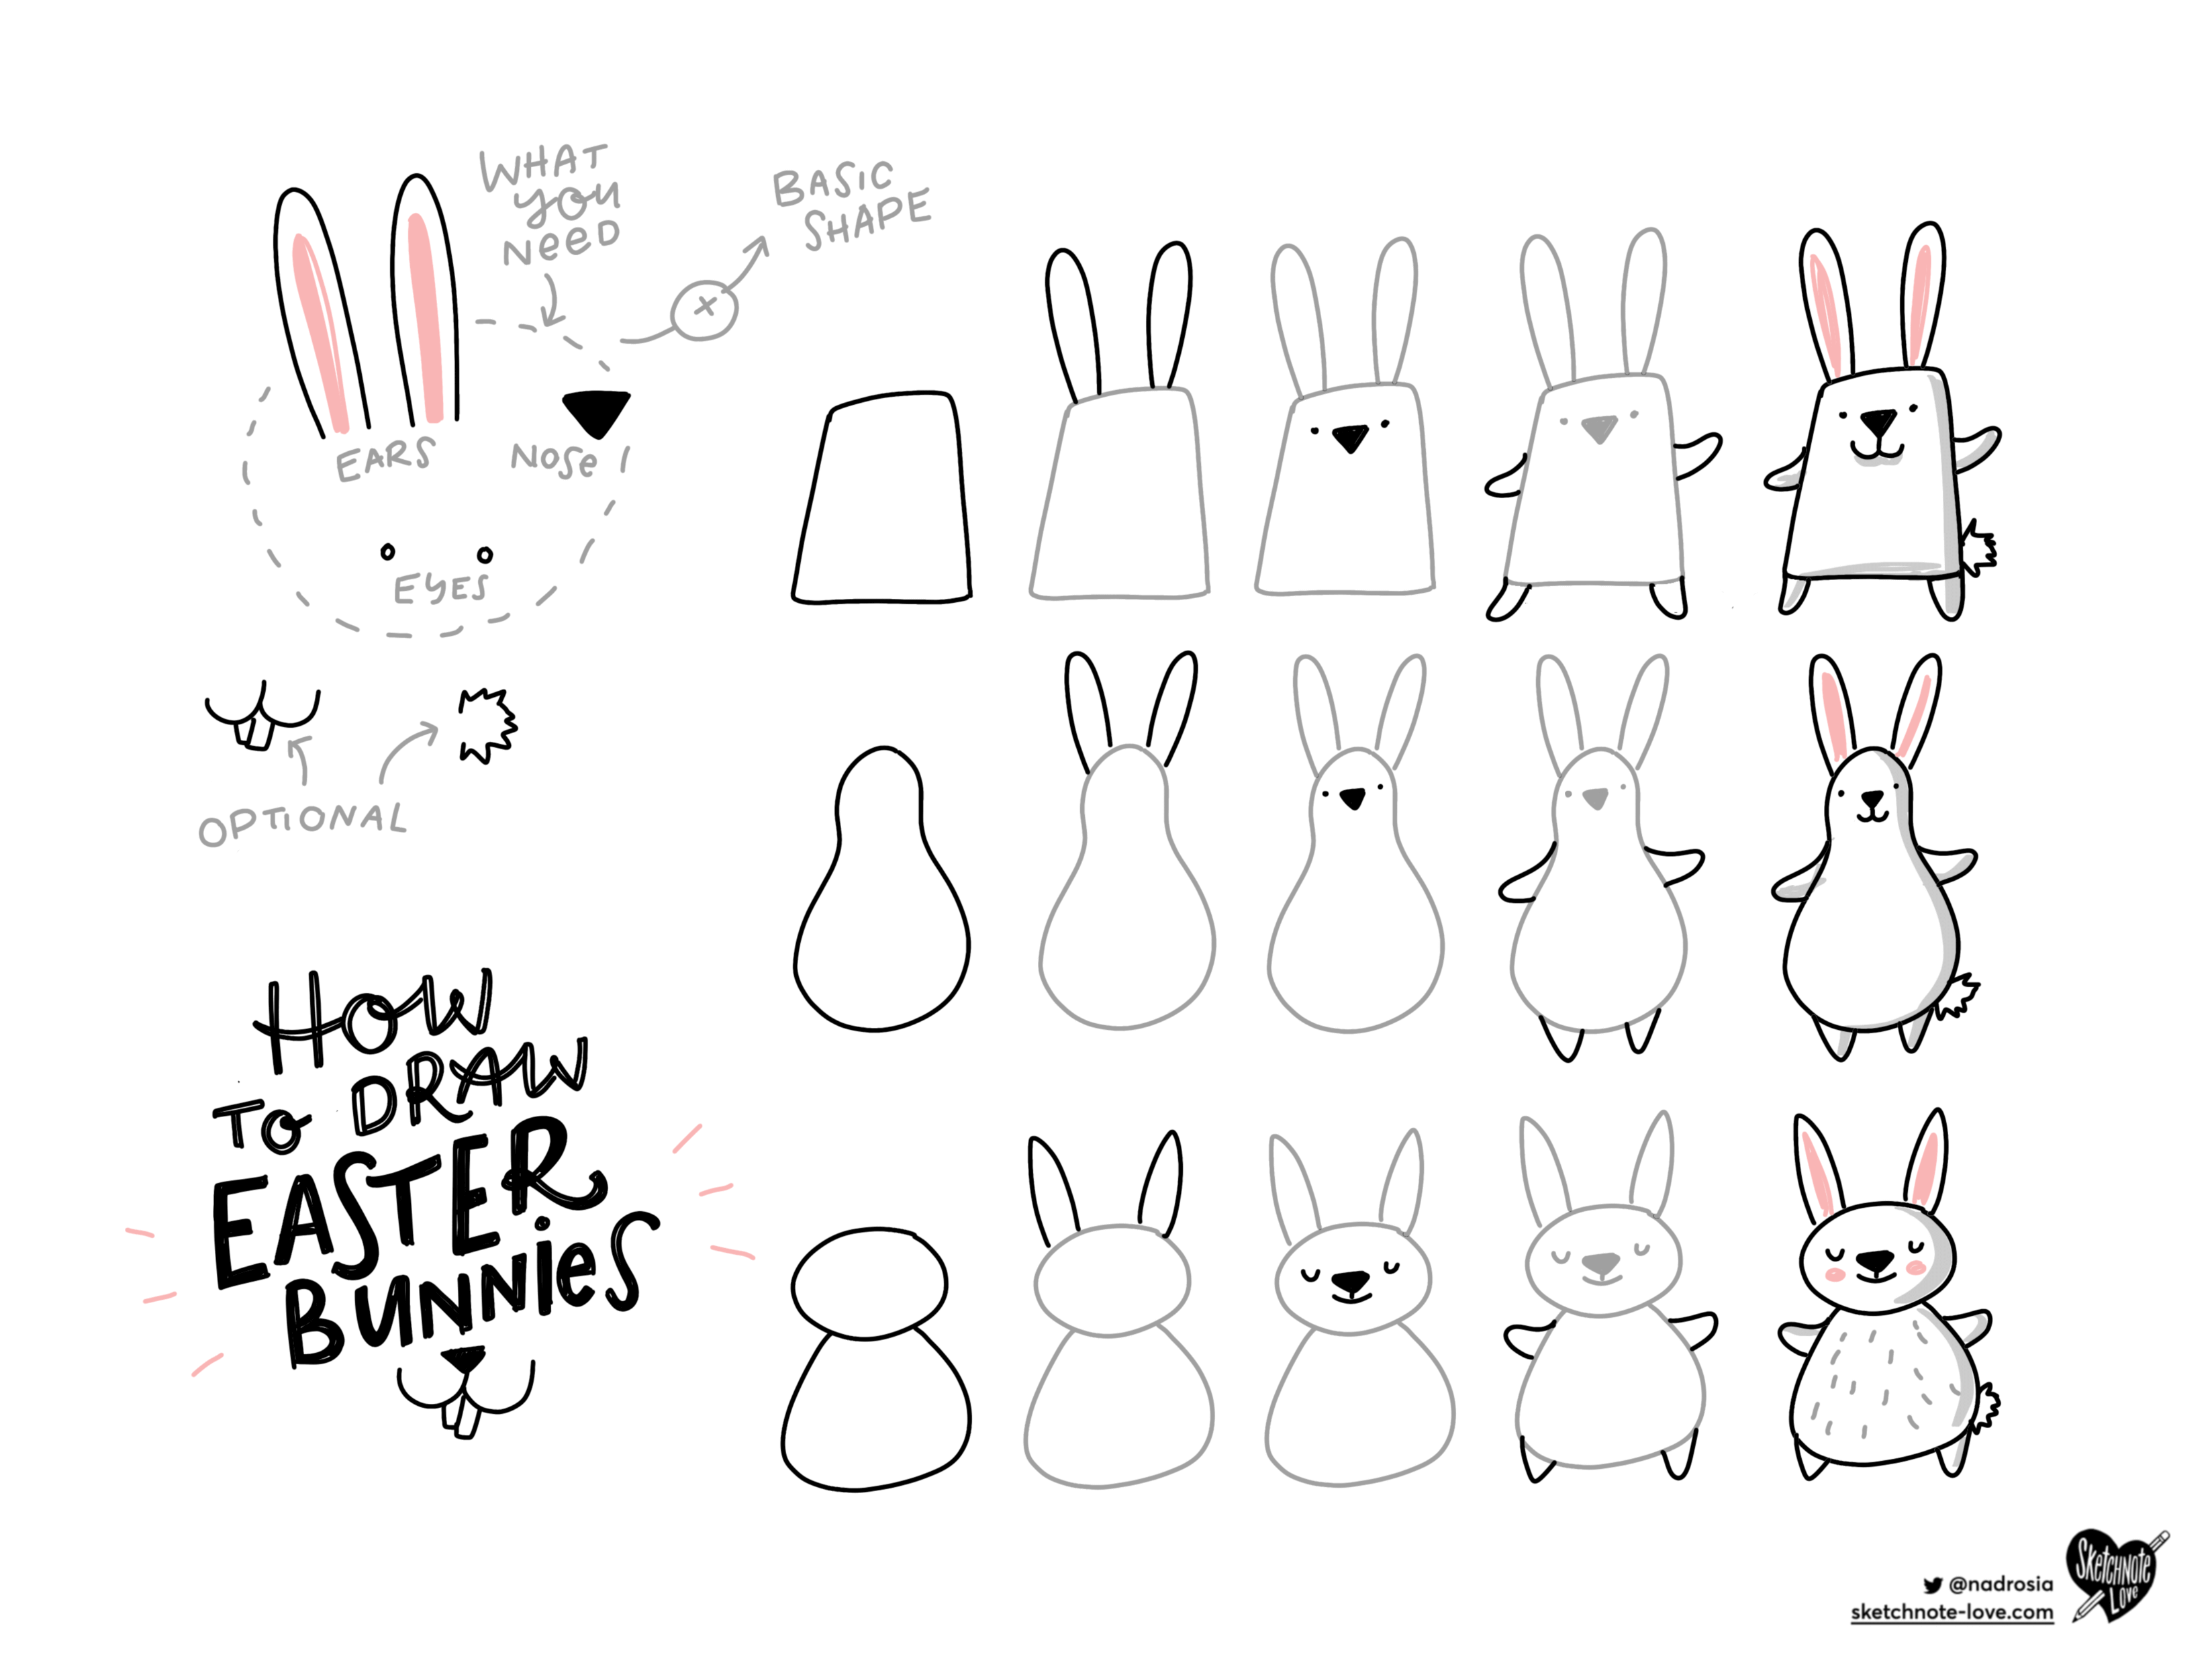 Sketchnotes How to draw Easter Bunnies